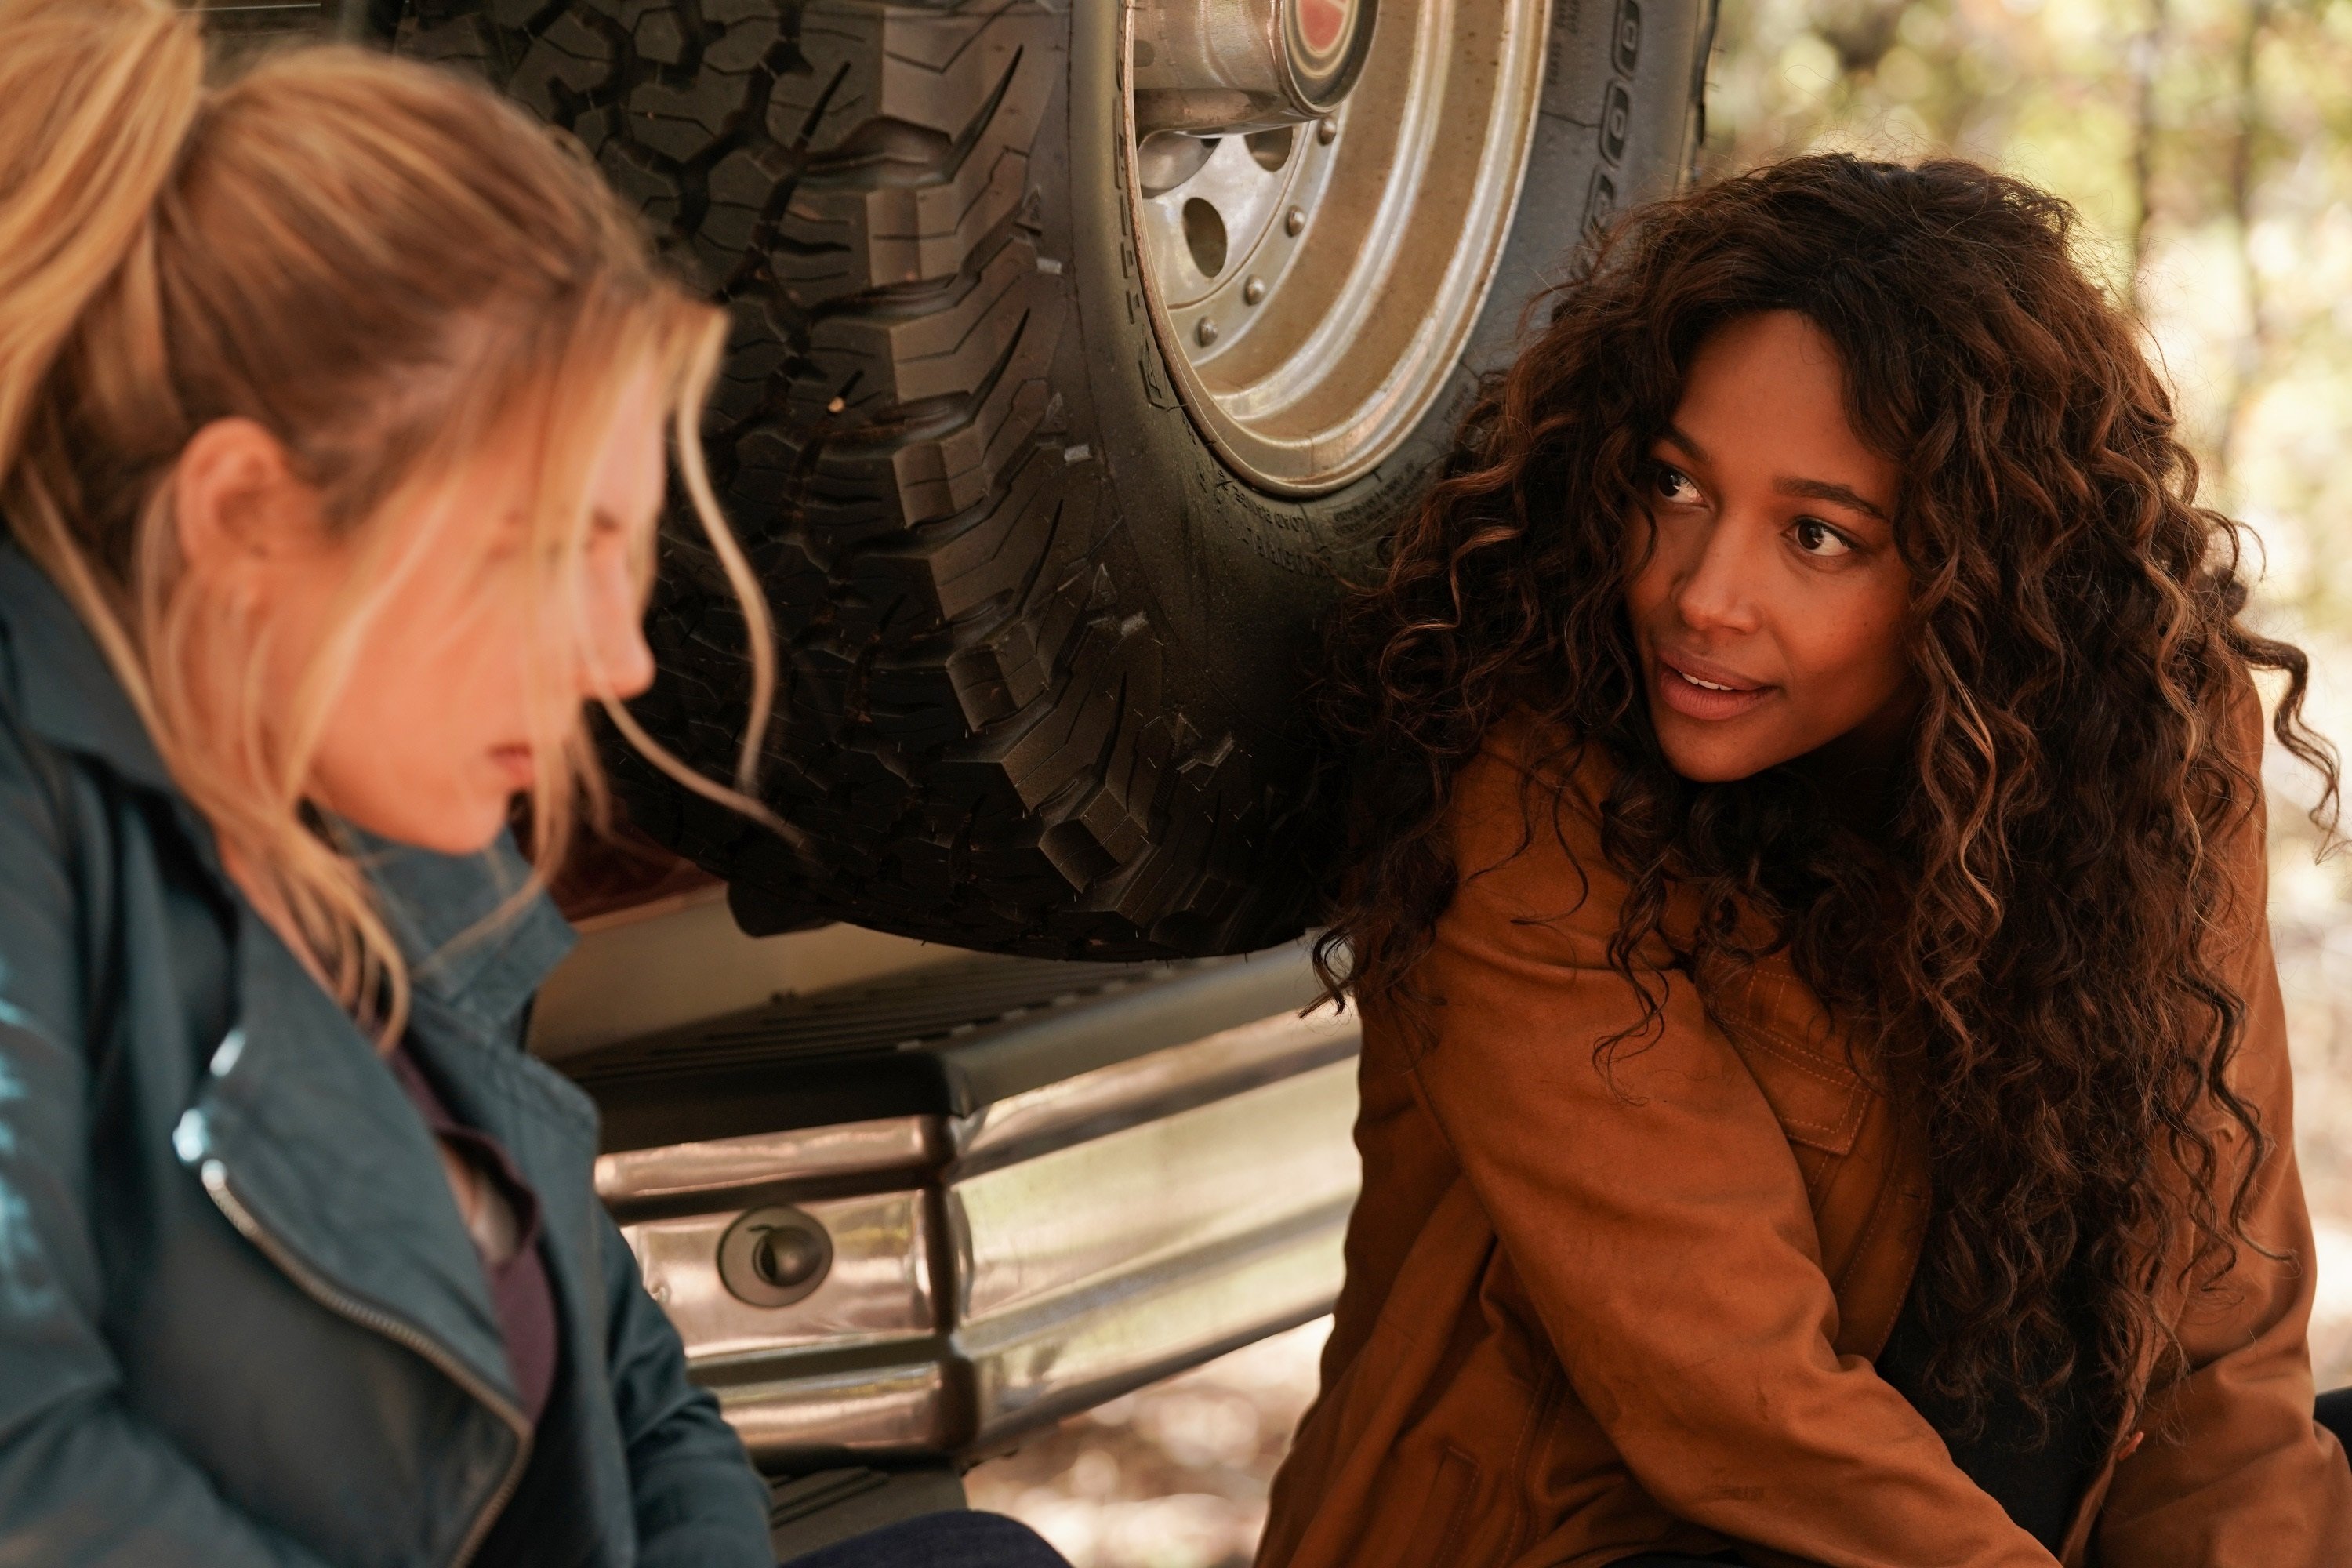 'Big Sky' Jenny Hoyt and Cassie Dewell looking at each other portrayed by Katheryn Winnick and Kylie Bunbury